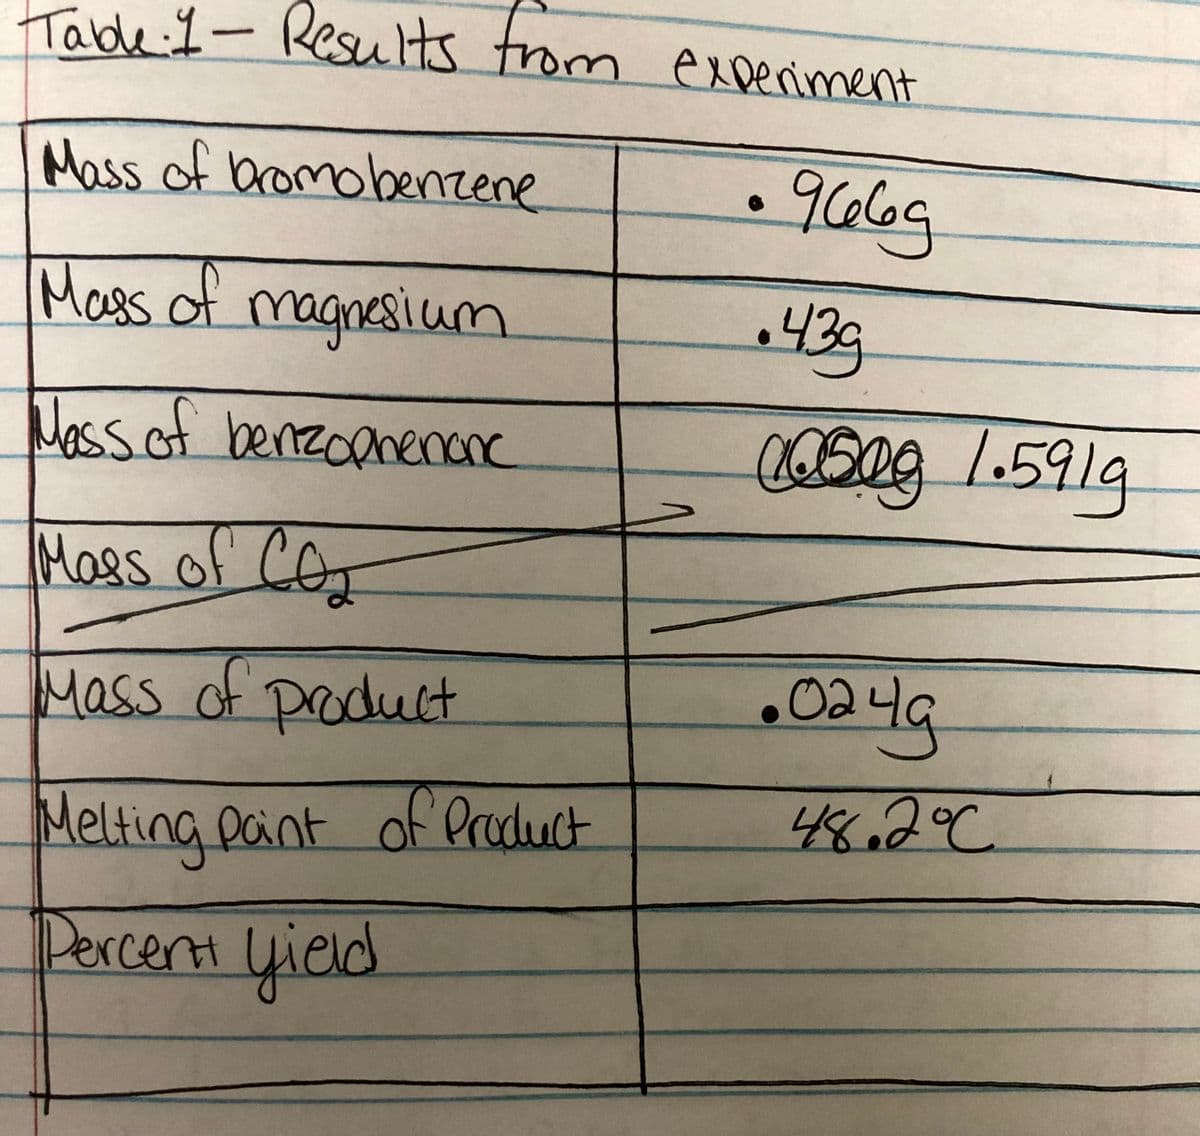 Table 1- Results from experiment
Mass of bromobenzene
•9669
Mass of magnesium
•43g
Mass of benzophenonc
casag 1.591g
Mass of CO₂
Mass of product
Melting point of Product
Percent yield
•024g
48.2°℃